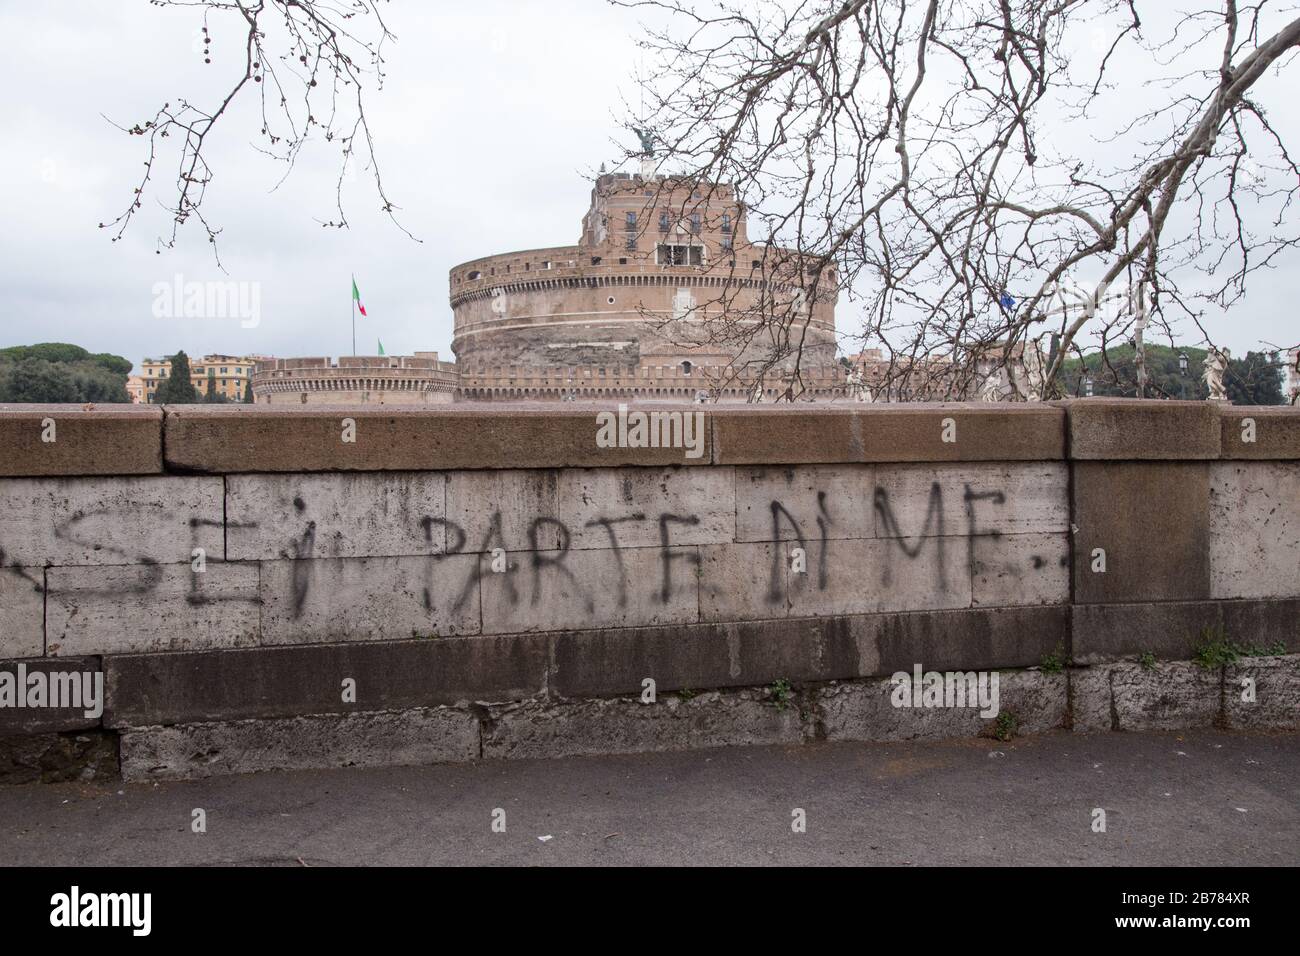 Roma, Italy. 14th Mar, 2020. Dedication on a wall at Lungotevere Tor di Nona (Photo by Matteo Nardone/Pacific Press) Credit: Pacific Press Agency/Alamy Live News Stock Photo